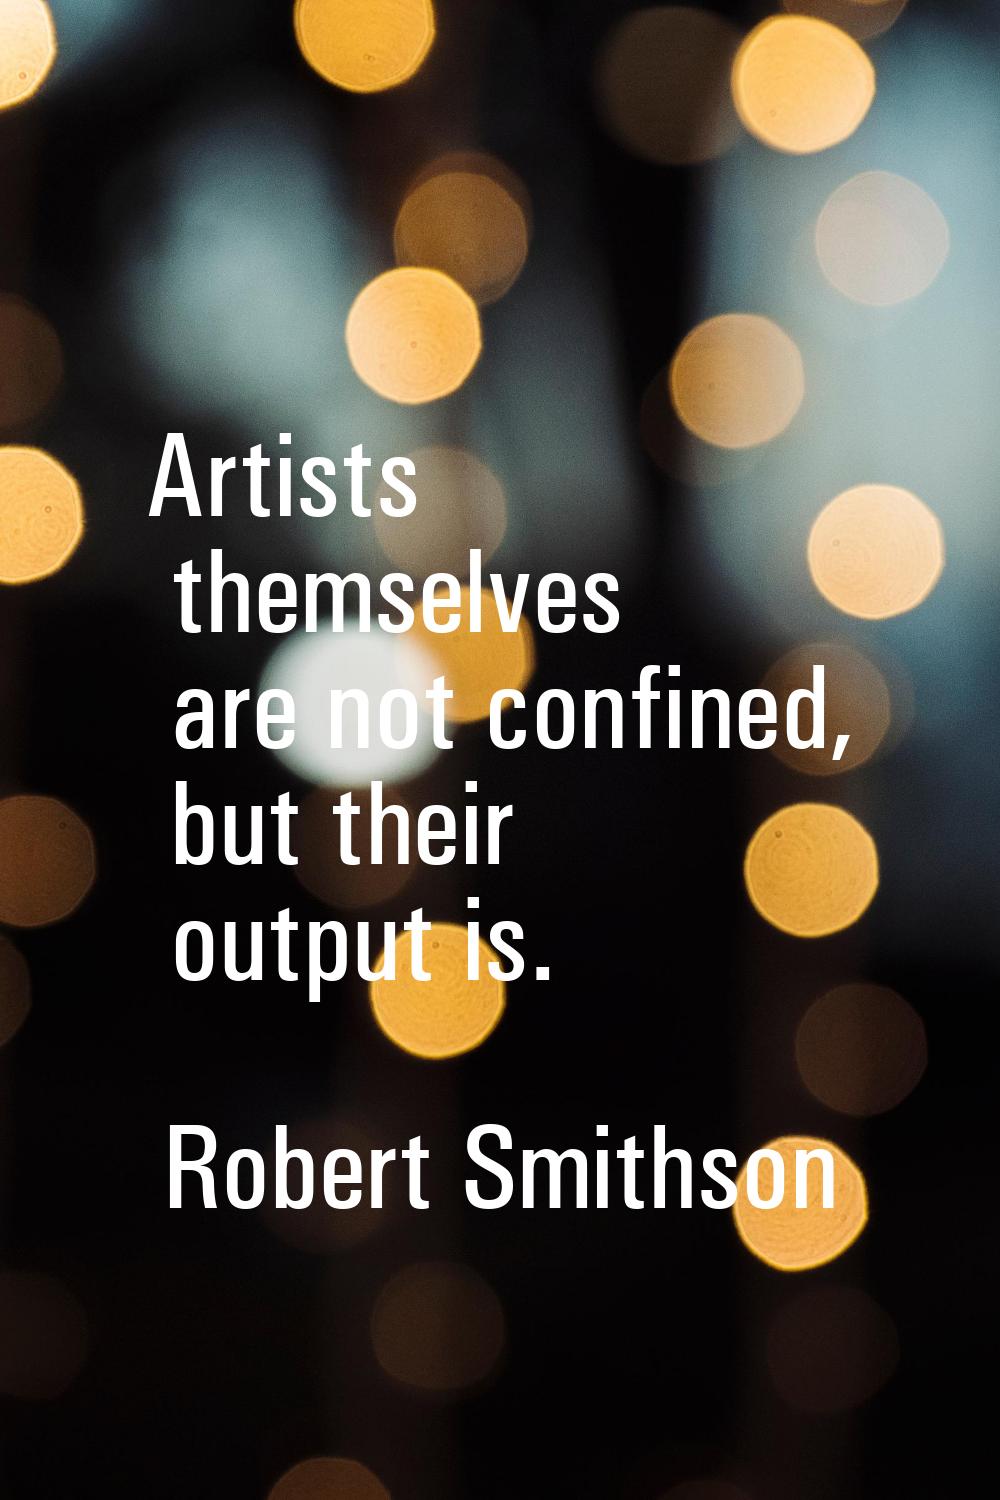 Artists themselves are not confined, but their output is.